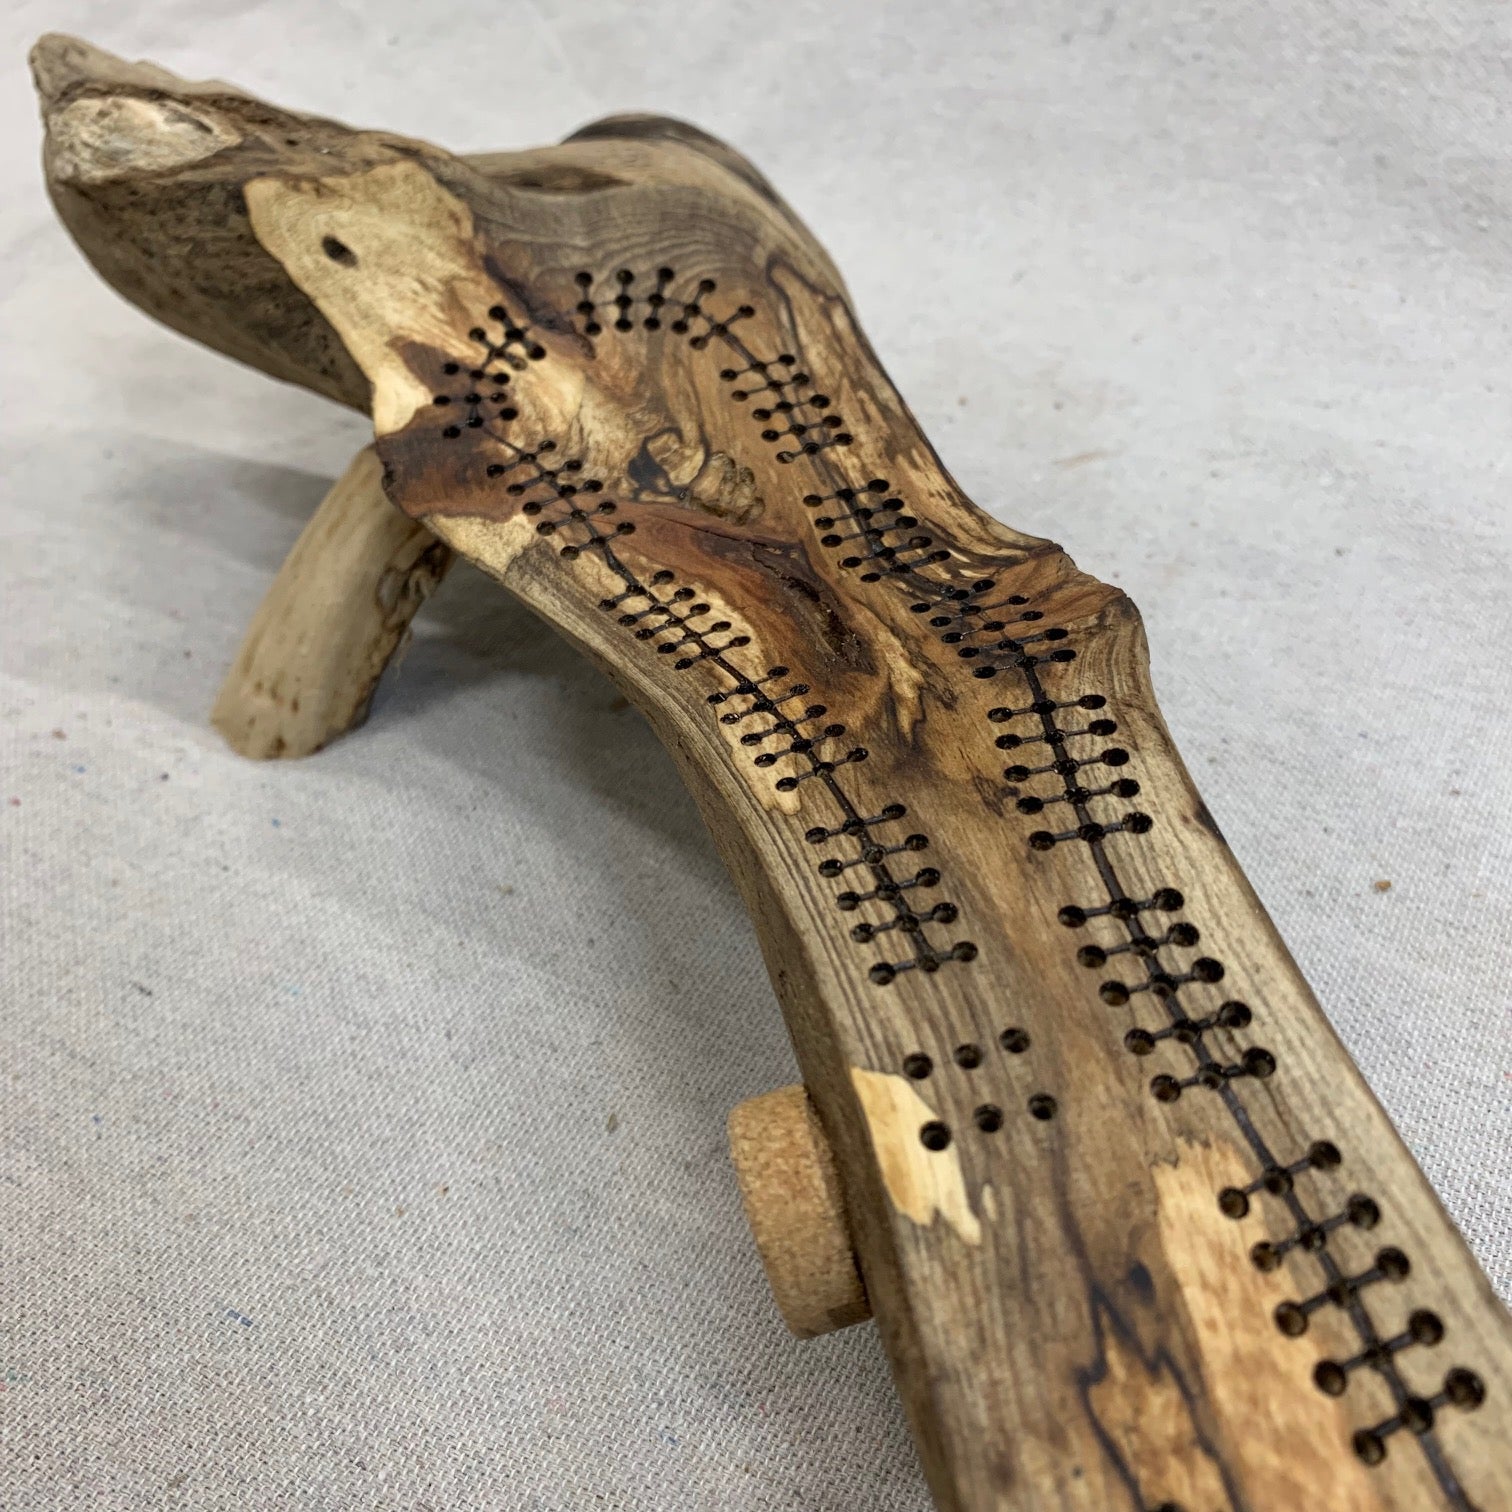 New Batch of One-of-a-Kind (OOAK) Driftwood Cribbage Boards!